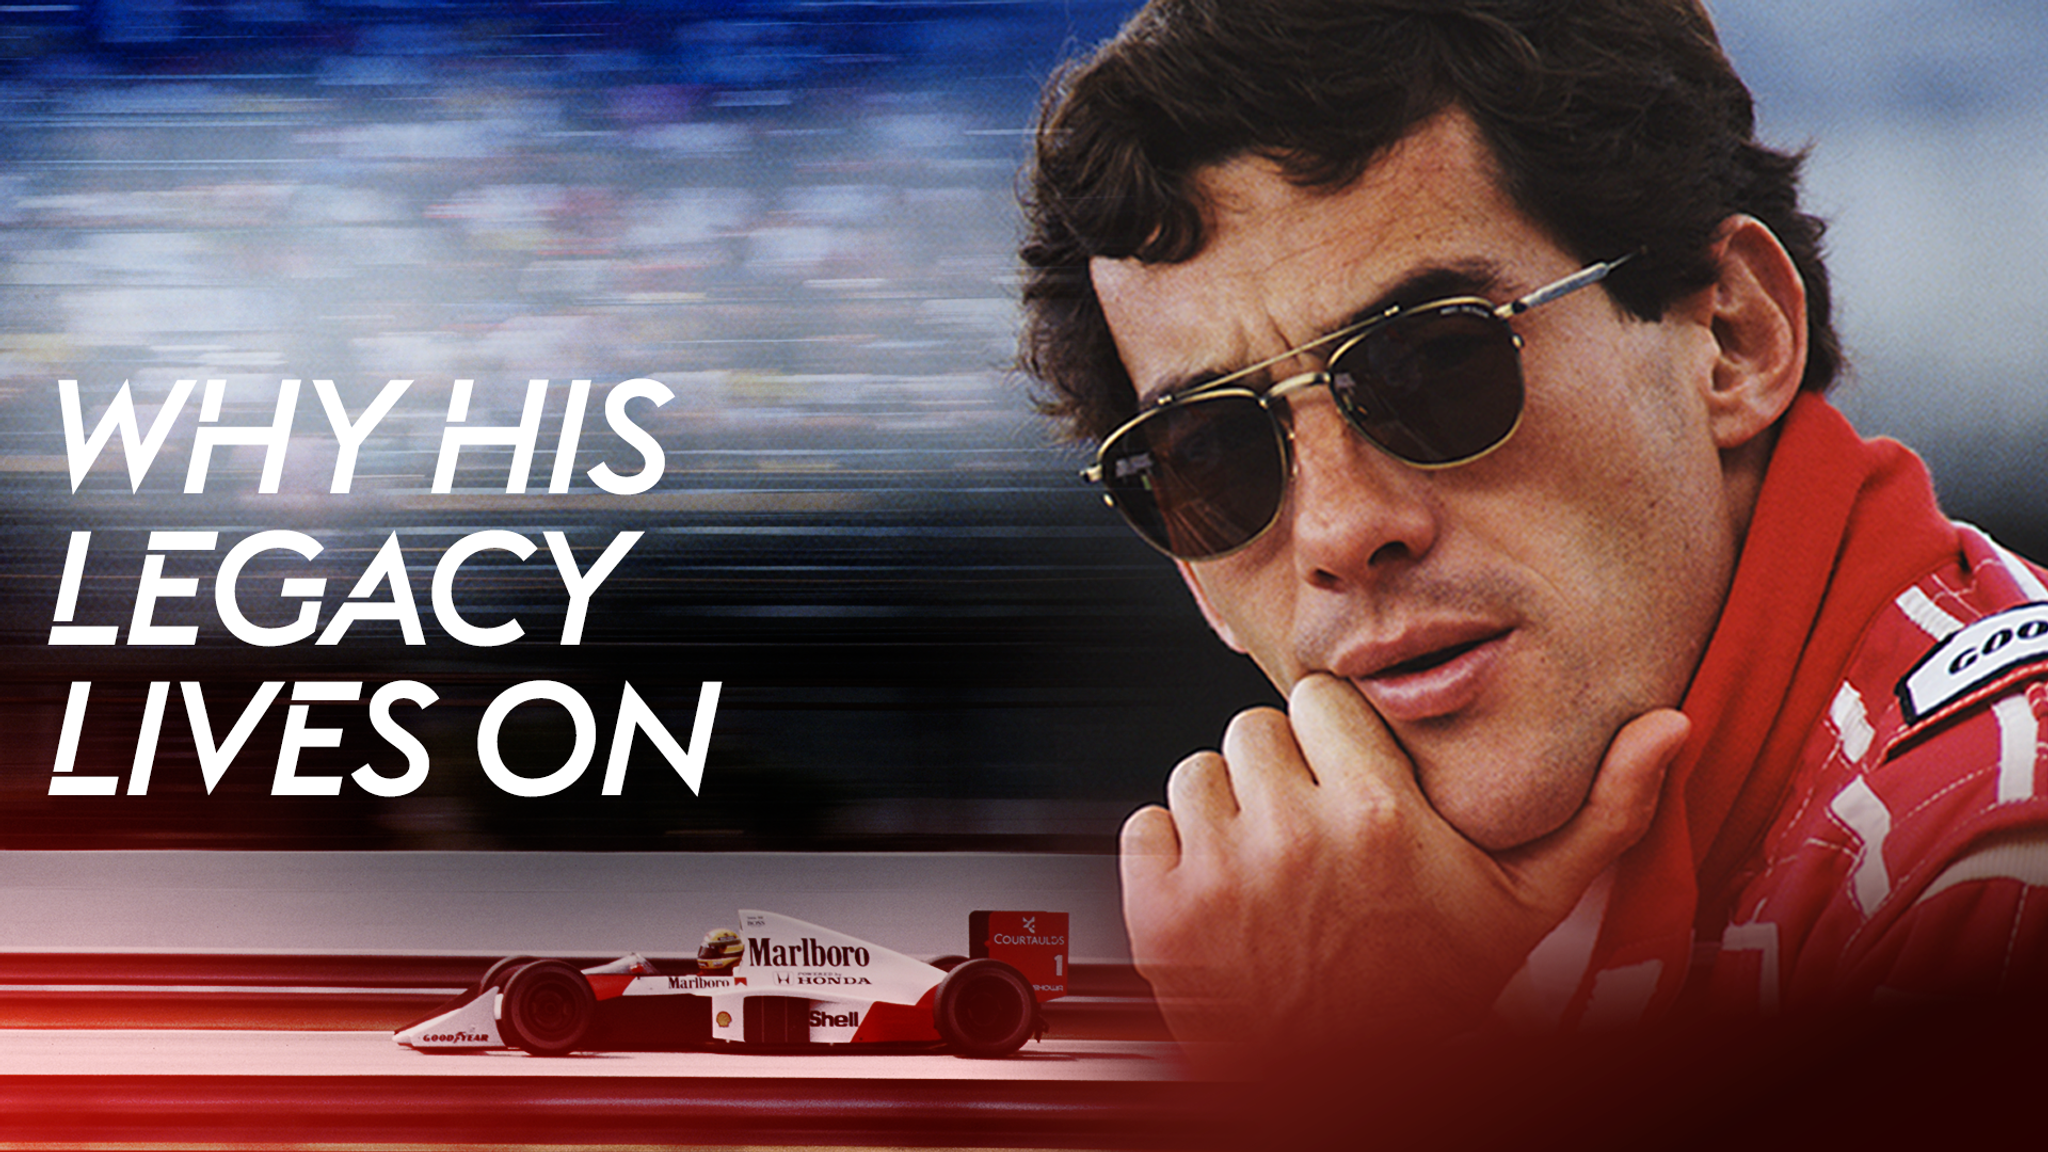 The pioneering F1 approach that made Ayrton Senna so special